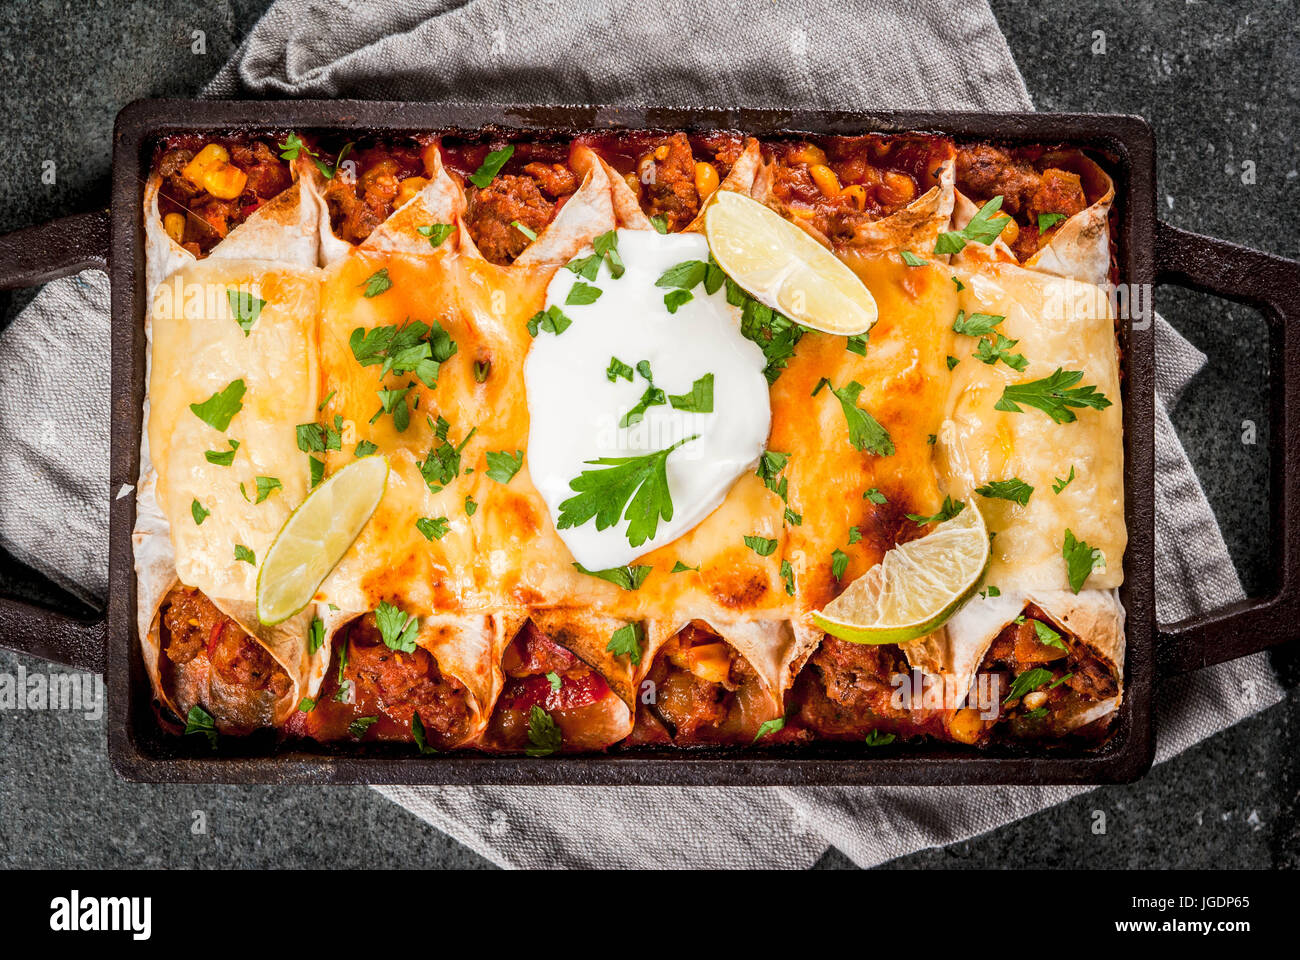 Mexican food. Cuisine of South America. Traditional dish of spicy beef enchiladas with corn, beans, tomato. On a baking tray, on a black stone backgro Stock Photo